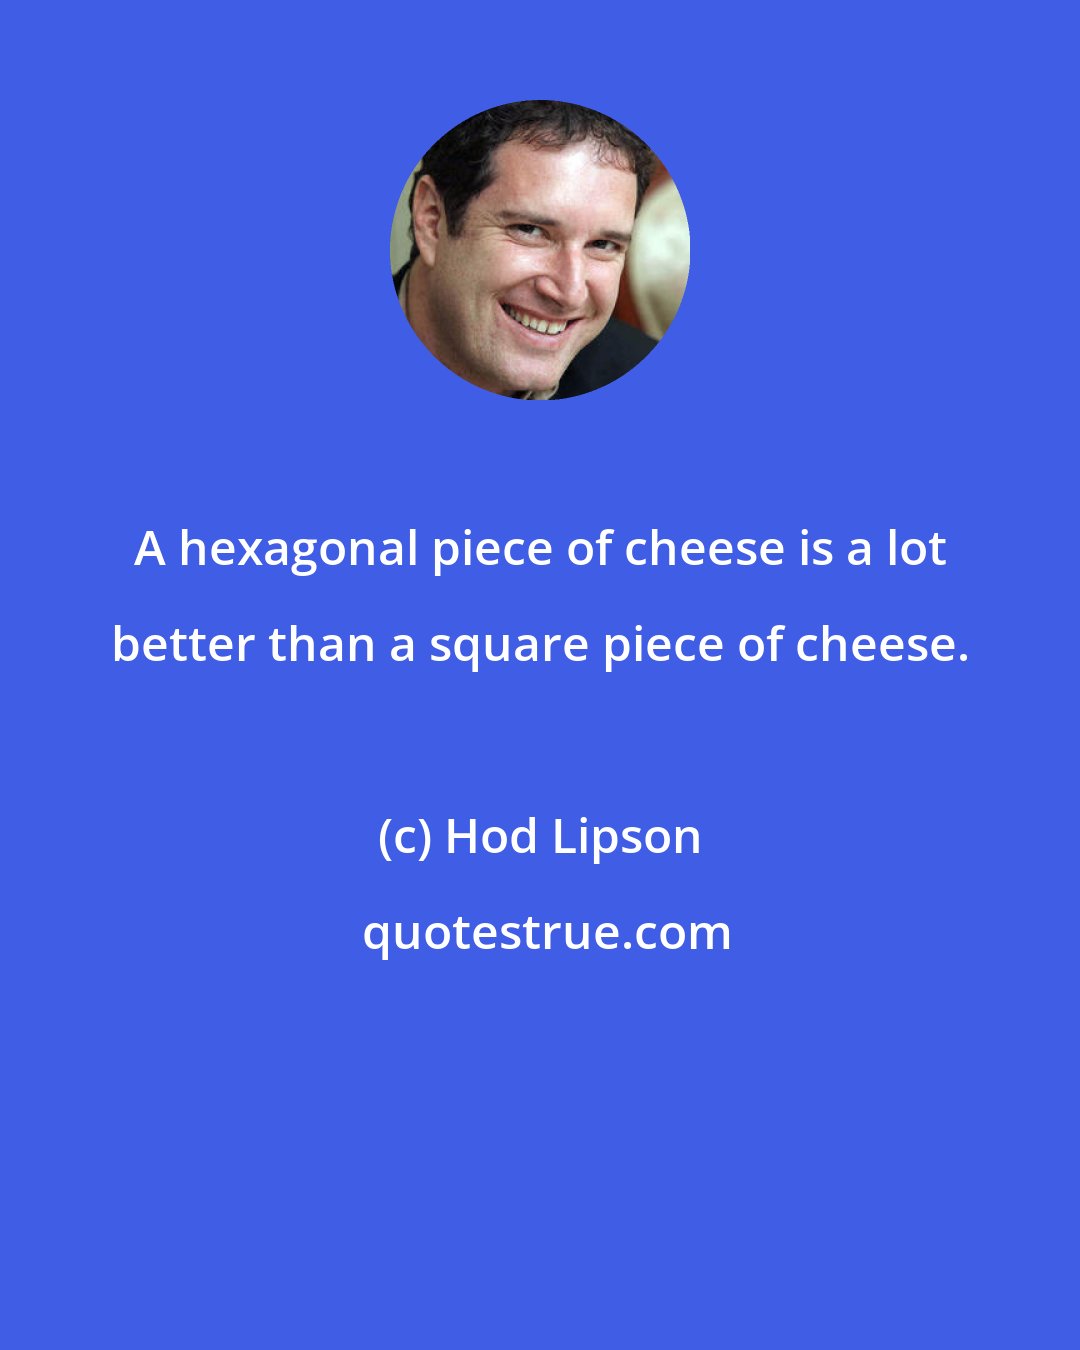 Hod Lipson: A hexagonal piece of cheese is a lot better than a square piece of cheese.